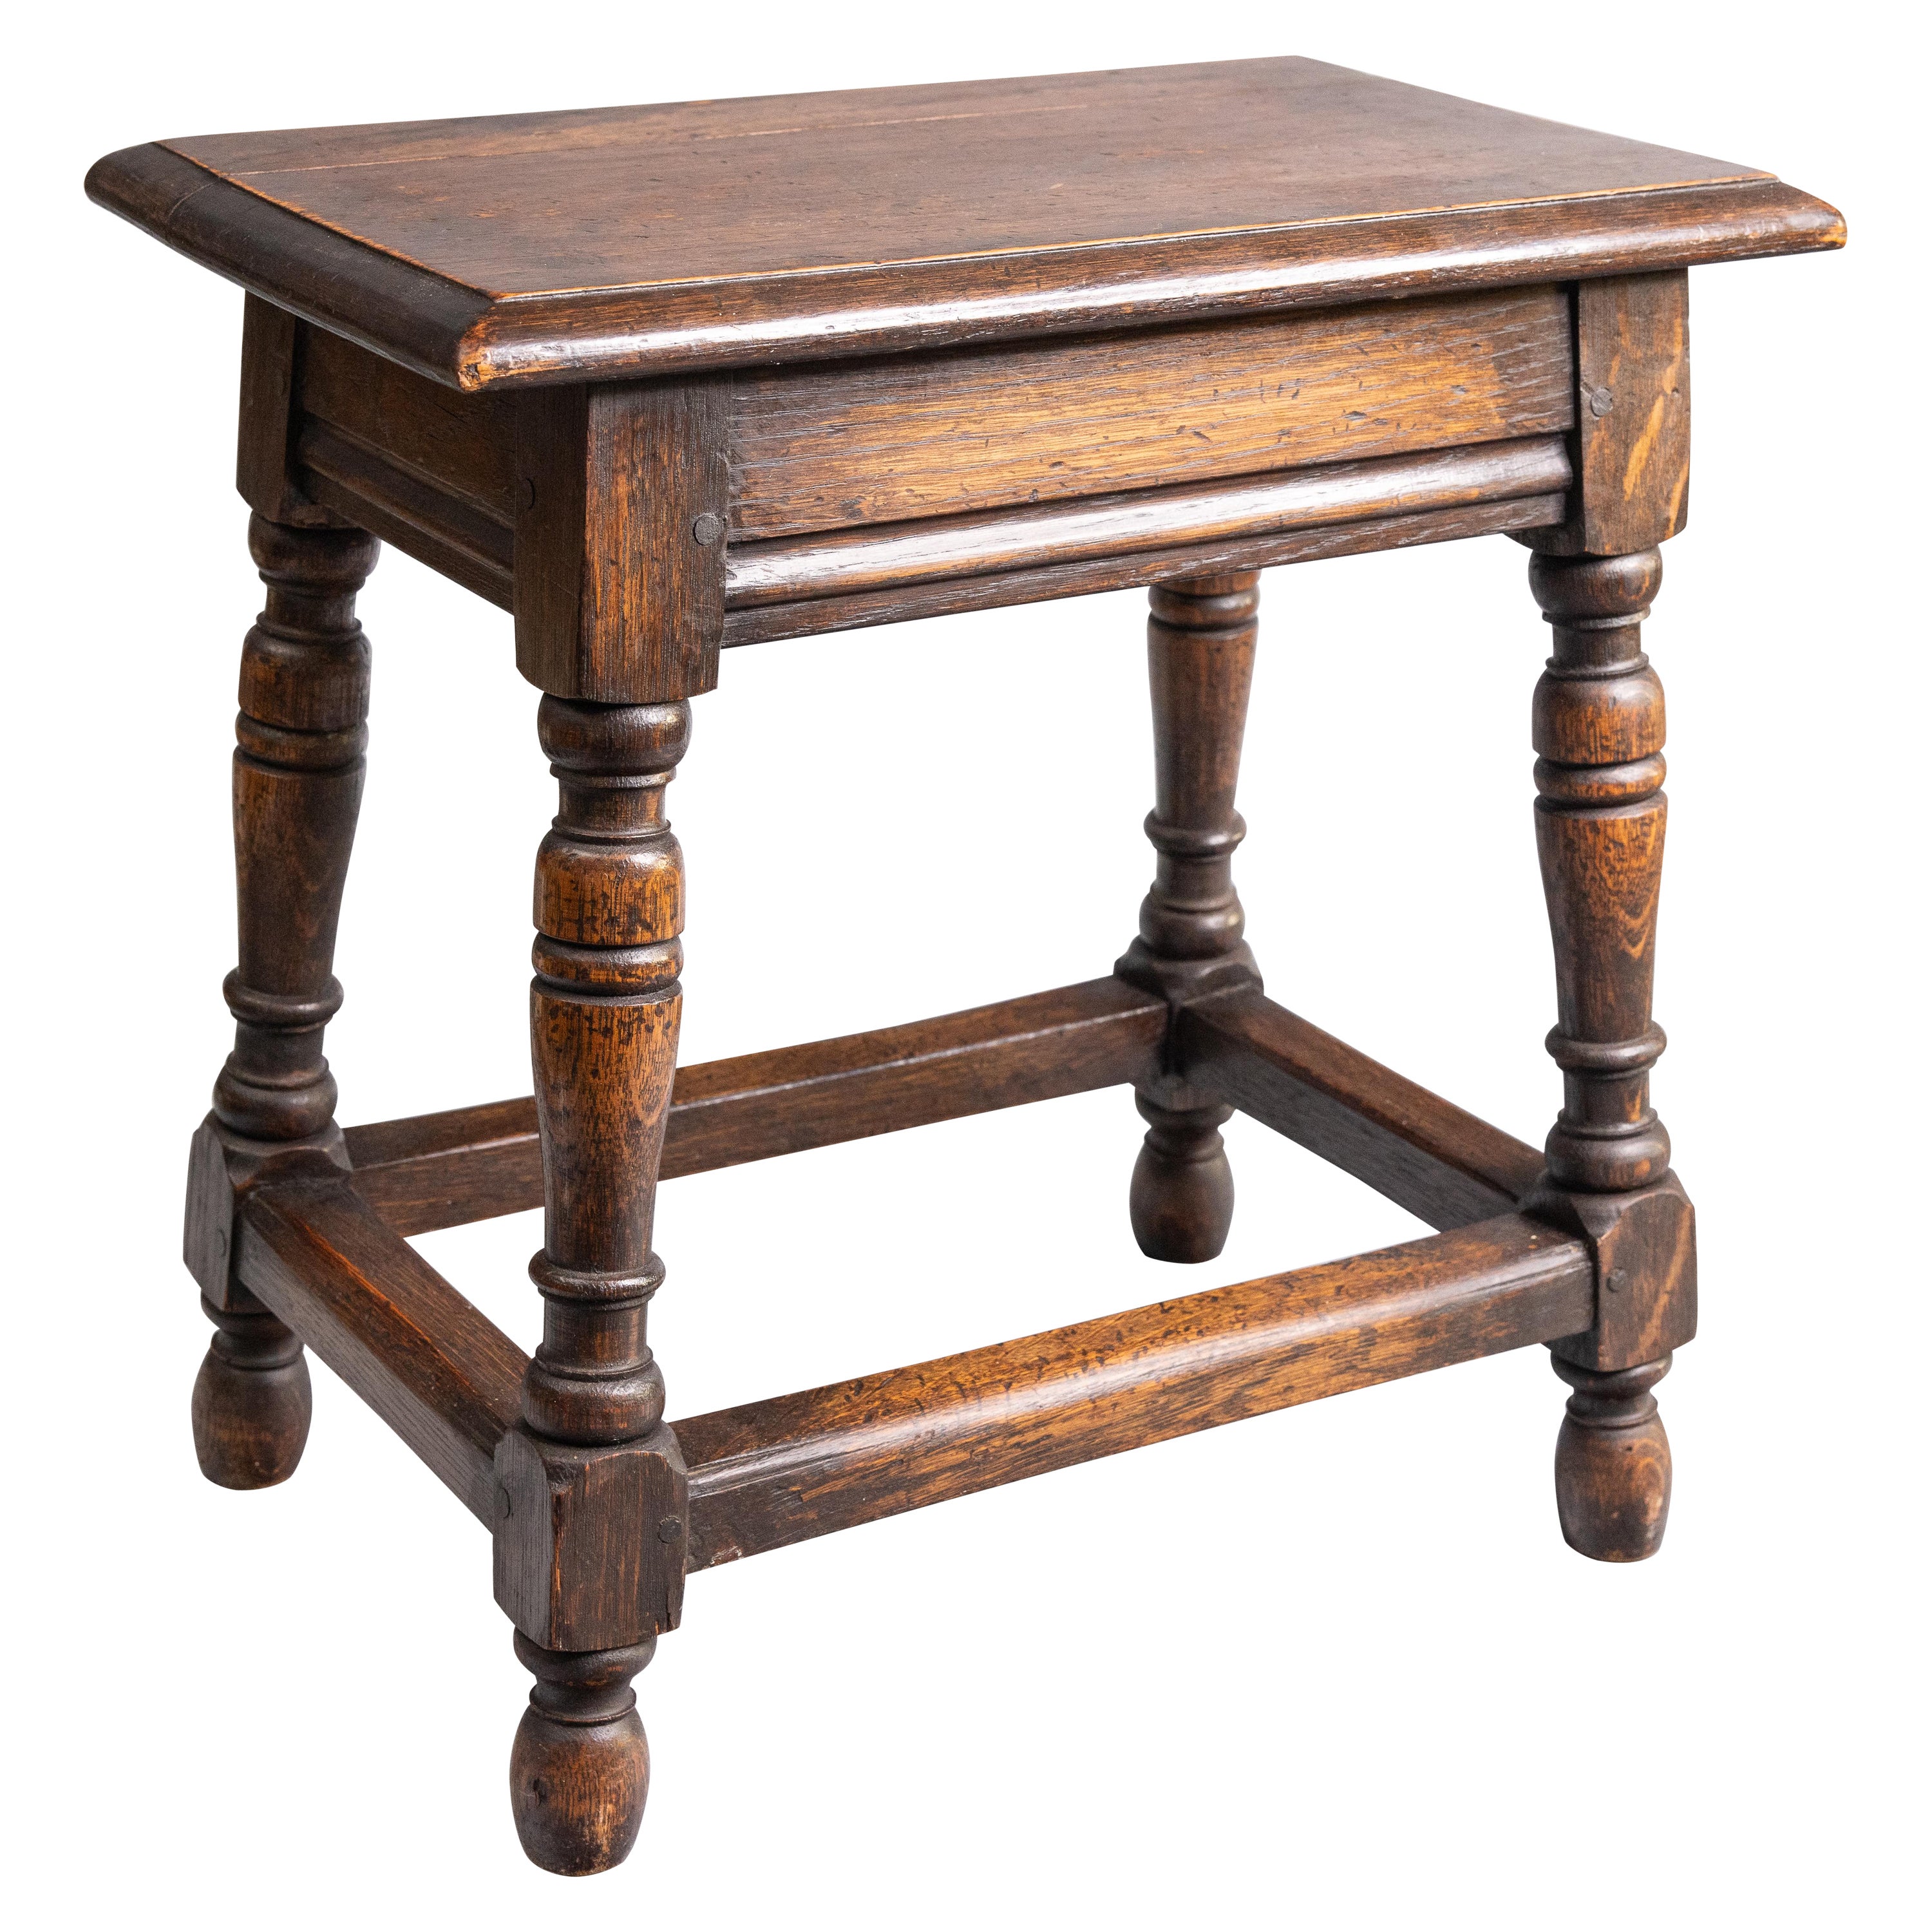 19th Century English Oak Pegged Joint Stool Side Table For Sale